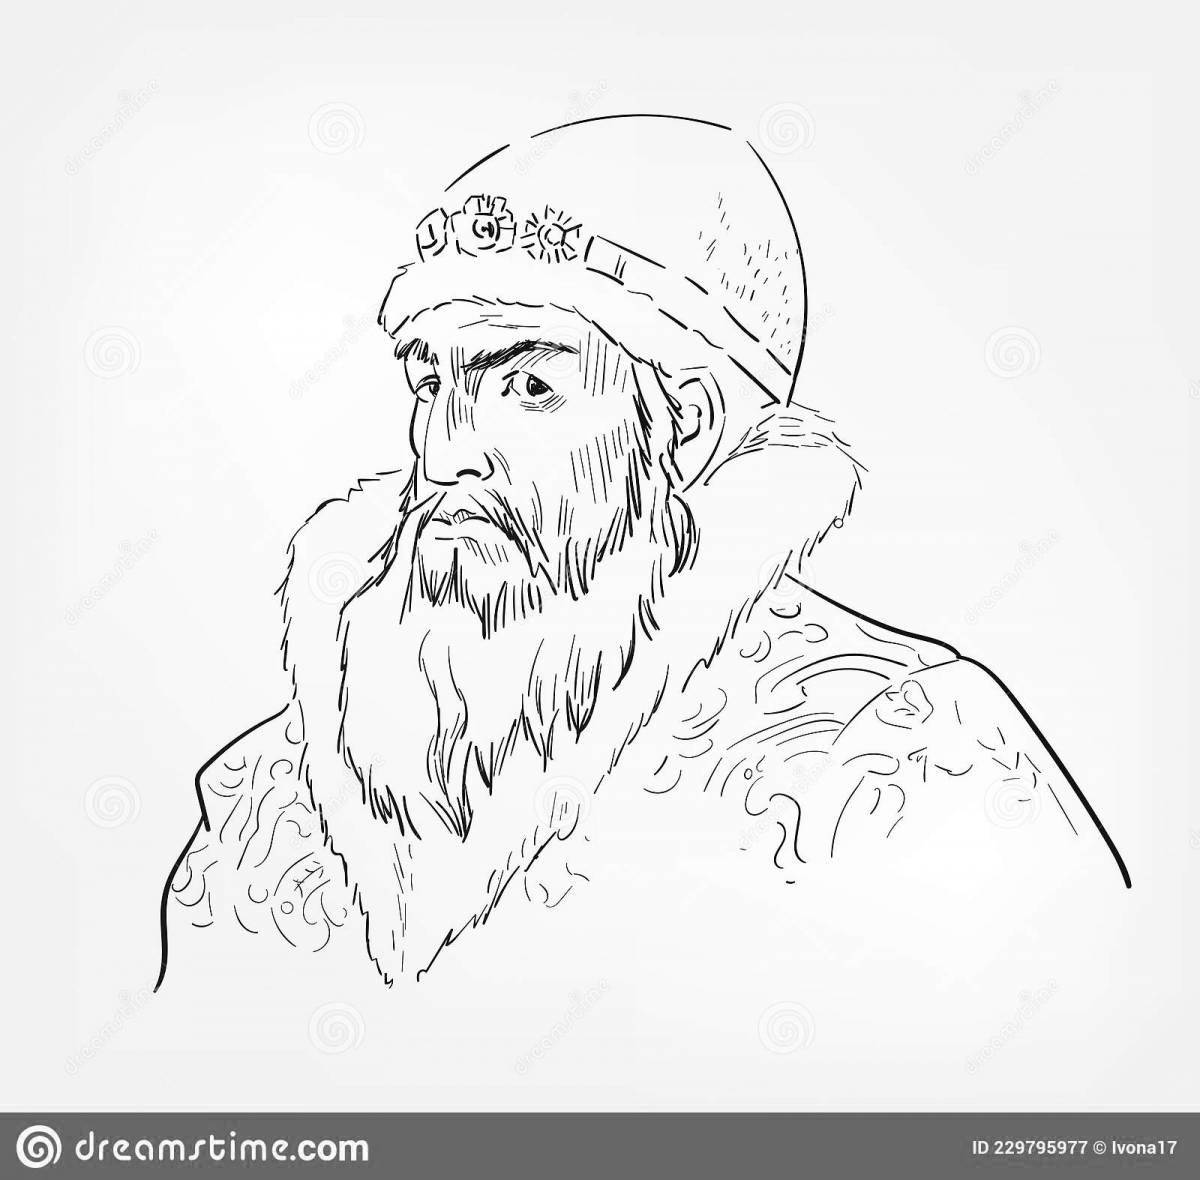 Colouring bright Ivan the Terrible